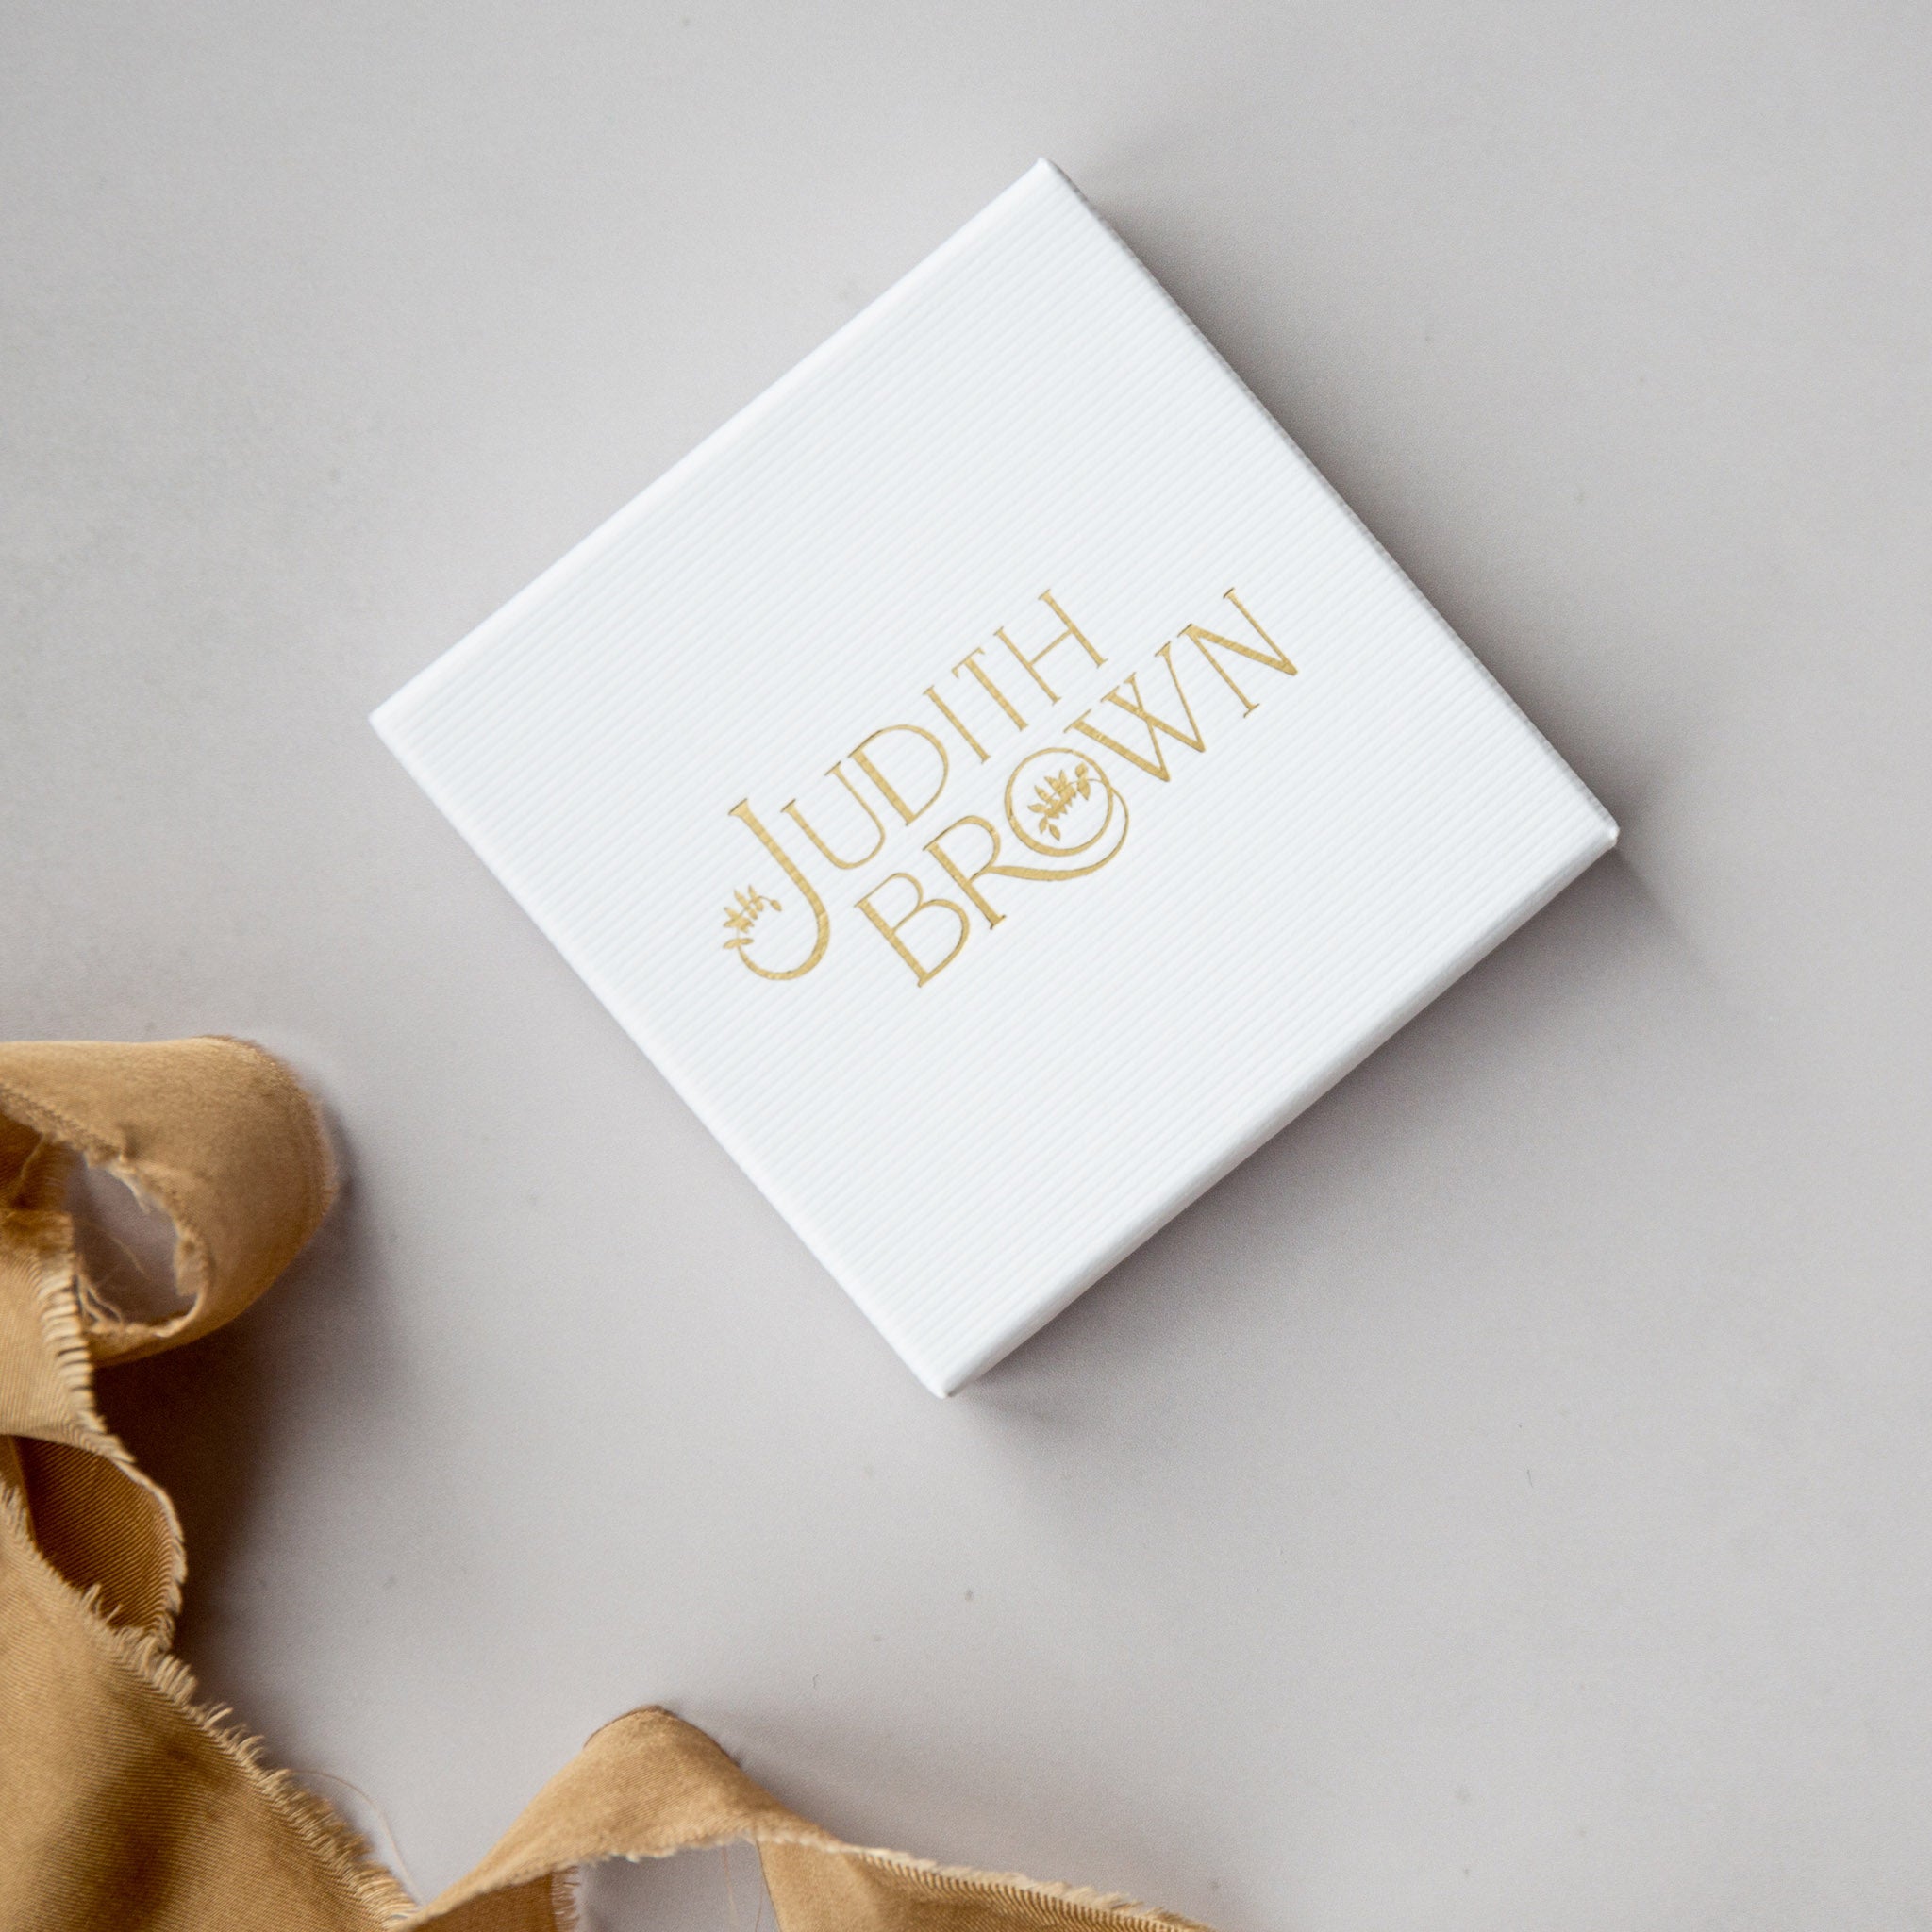 Presentation box for Judith Brown Bridal's wedding accessorties and jewellery